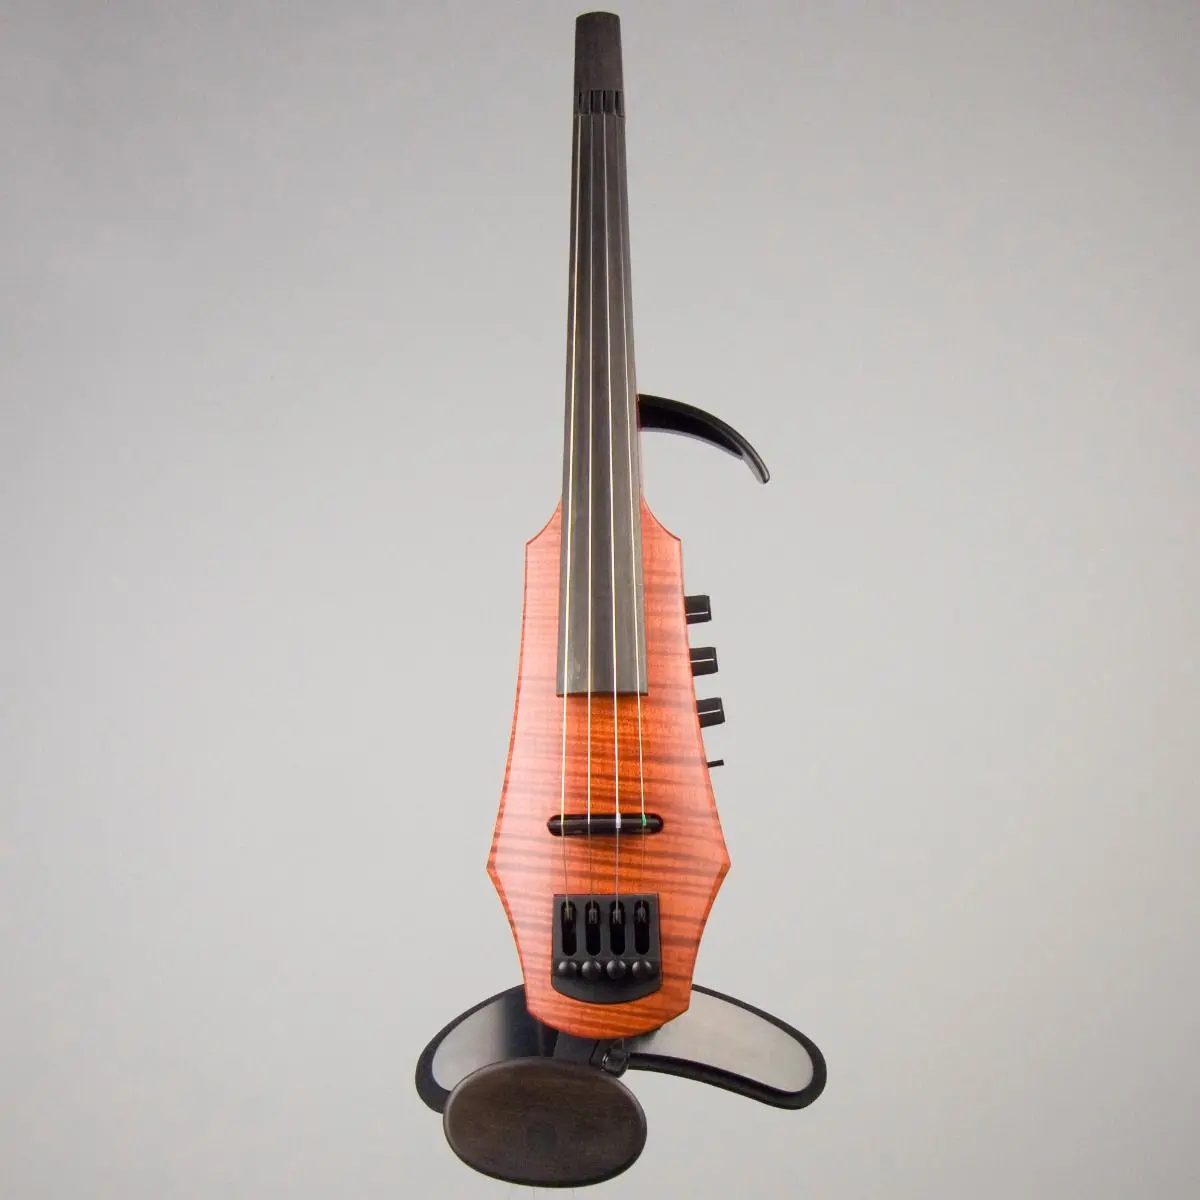 electric violin design - Why do electric violins have 5 strings